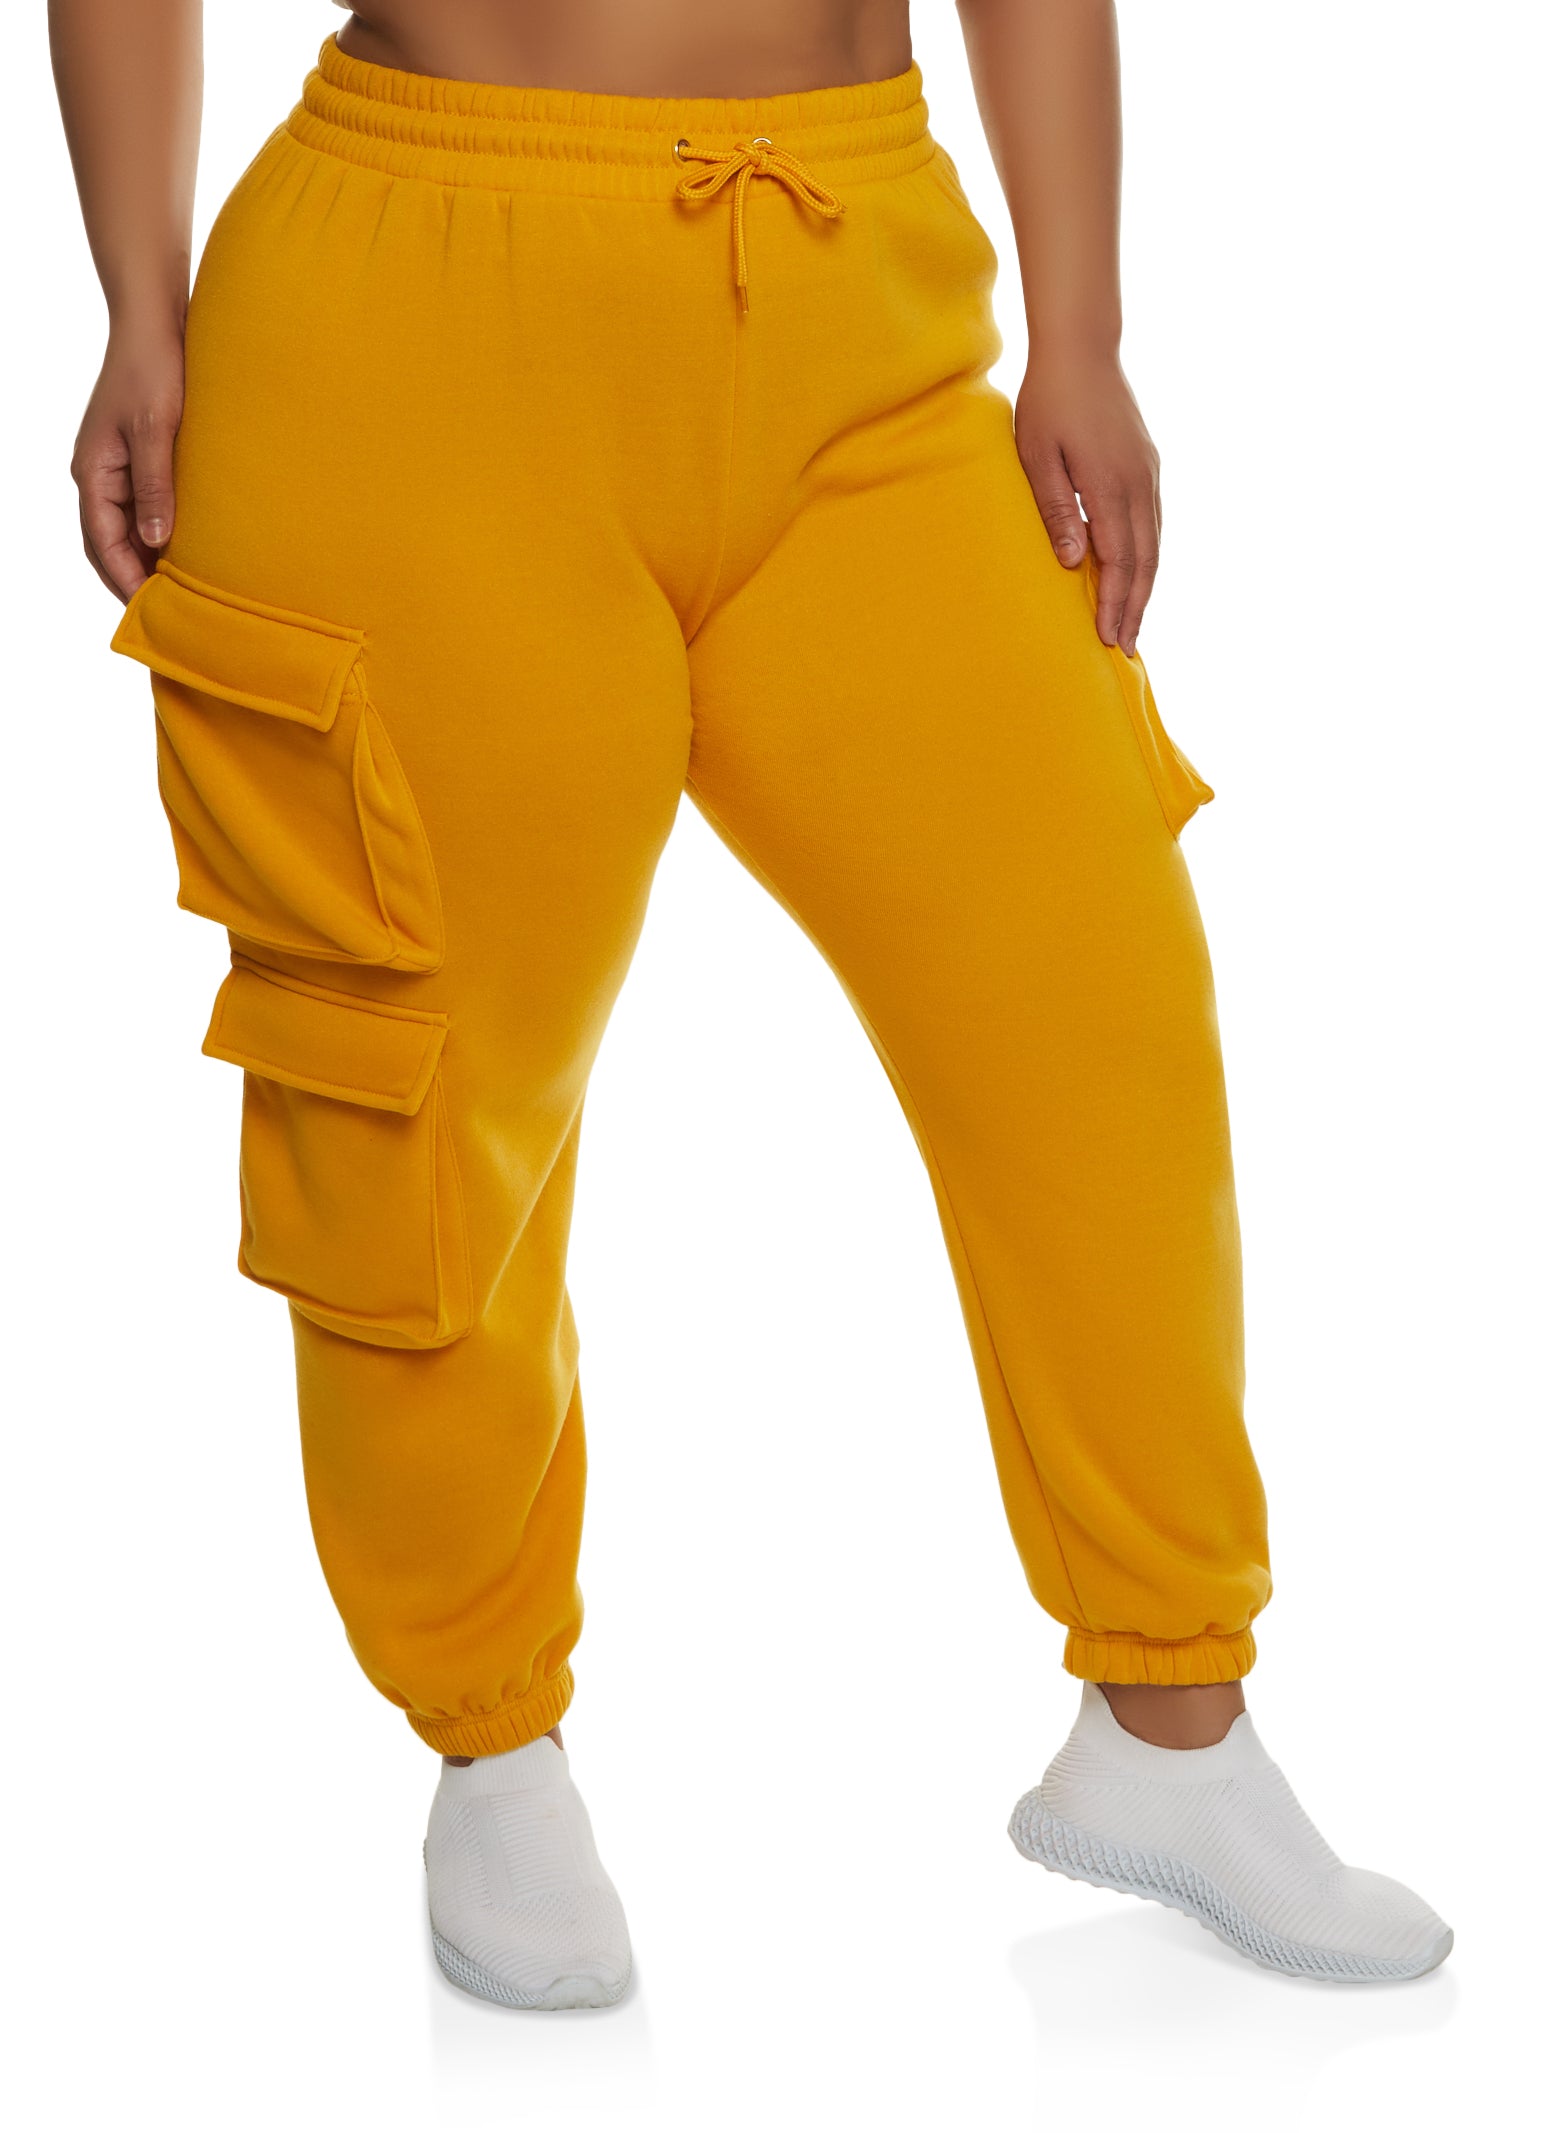  magorange Women Plus Size Tracksuit 2 Piece Outfits Zipper  Front Top and Sweatpants Jogger Sets Black : Clothing, Shoes & Jewelry